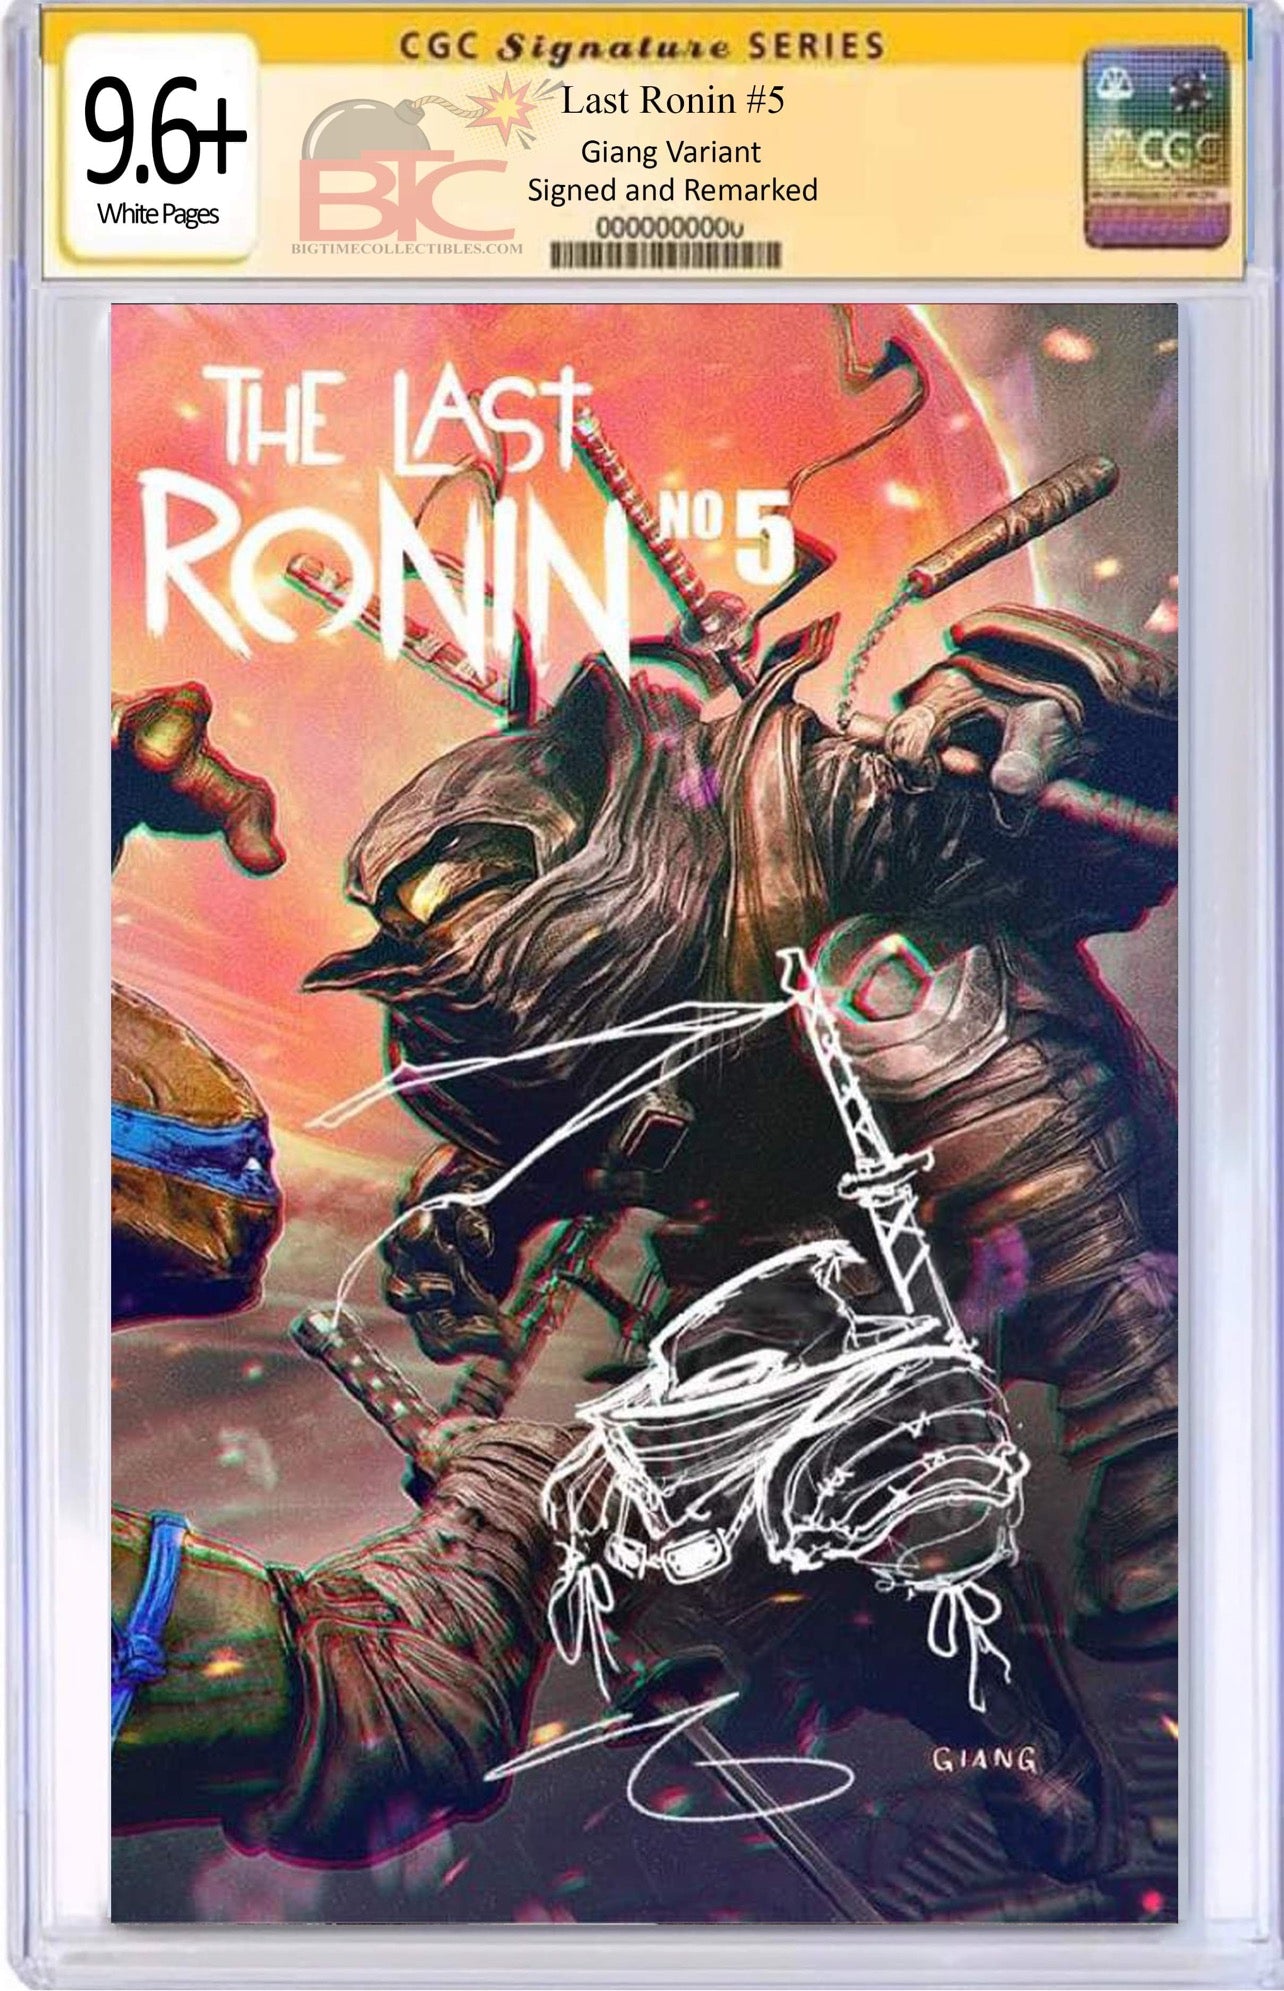 04/27/2022 TMNT THE LAST RONIN #5 JOHN GIANG EXCLUSIVE VARIANT (I1)